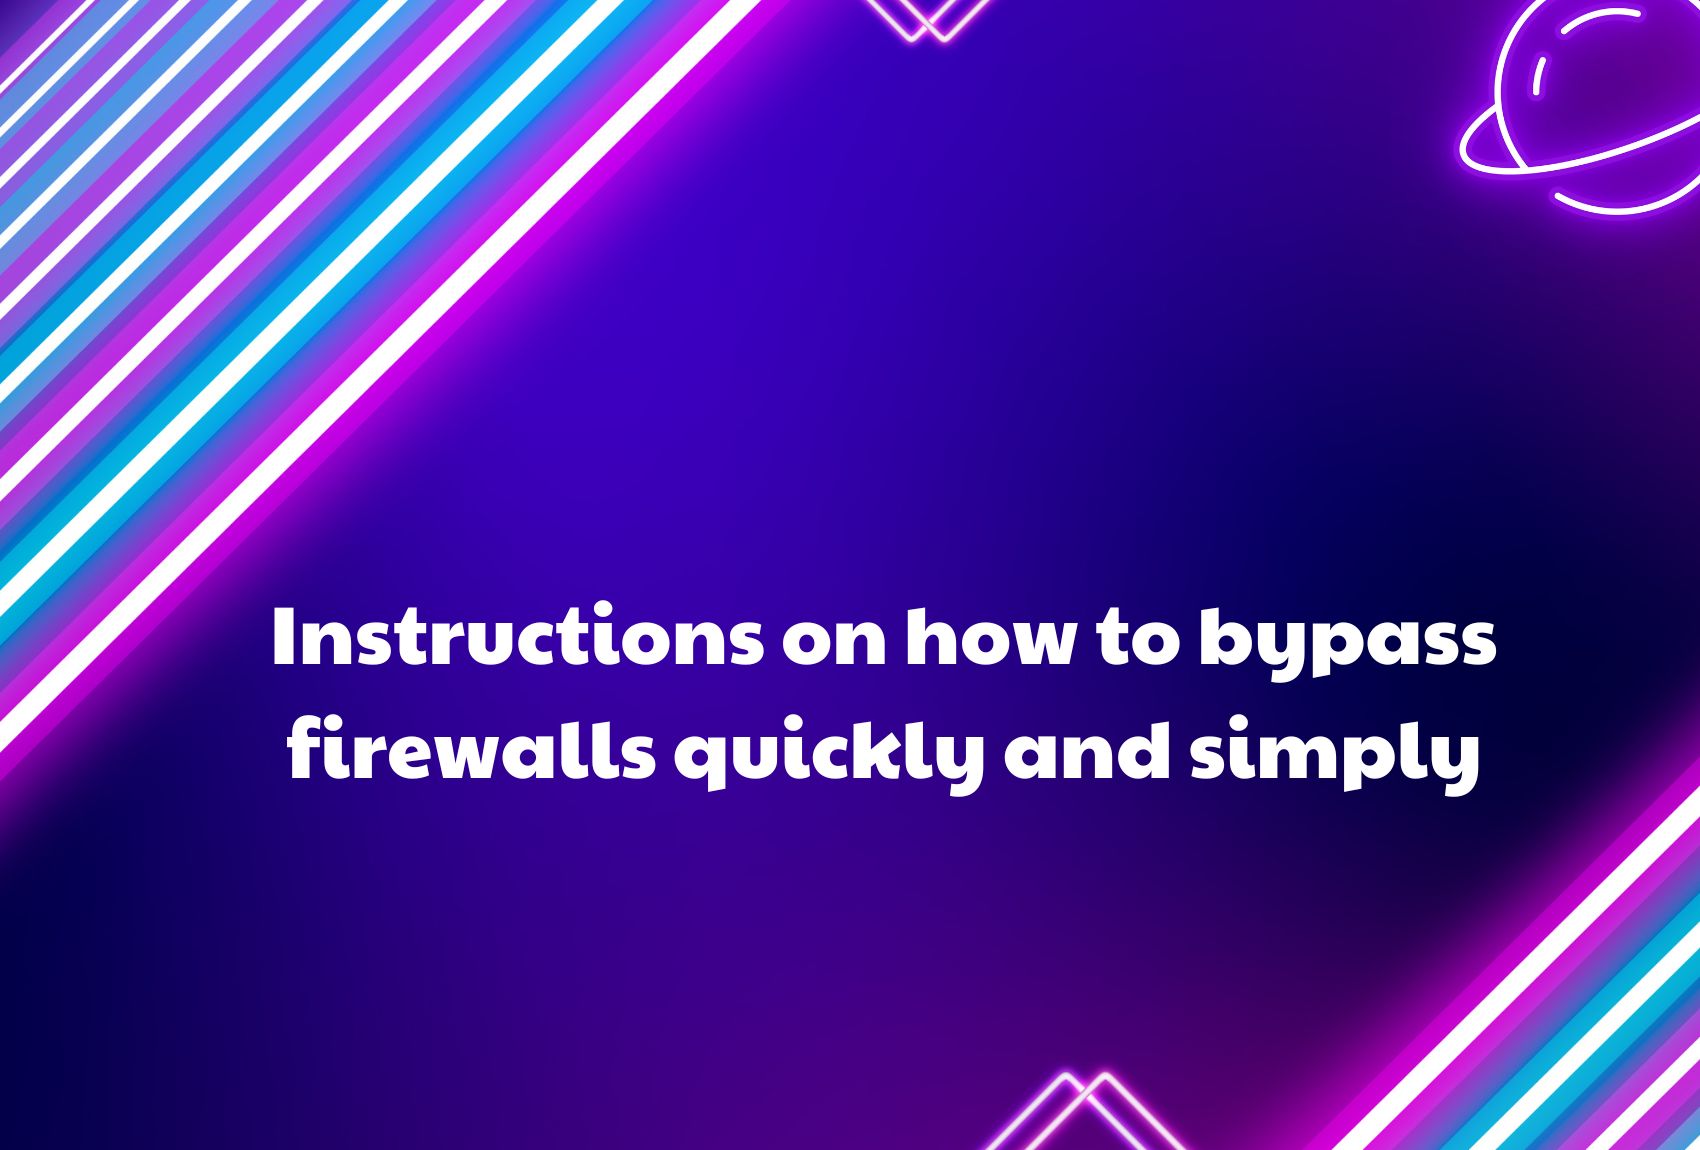 Instructions on how to bypass firewalls quickly and simply